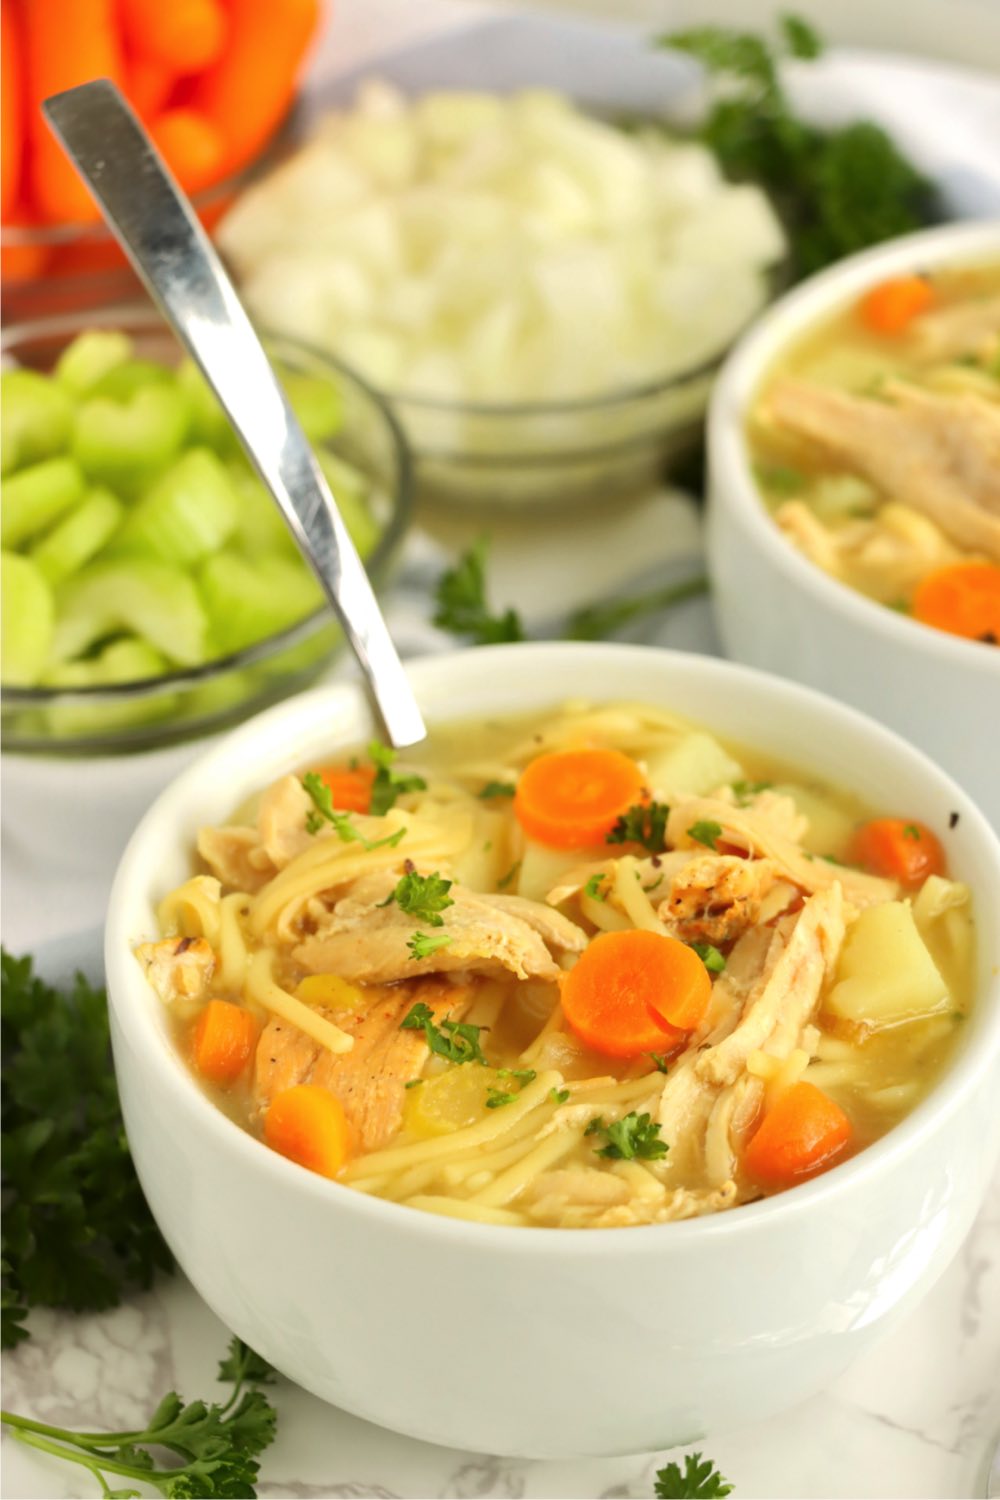 white bowl of soup filled with turkey, vegetables and noodles